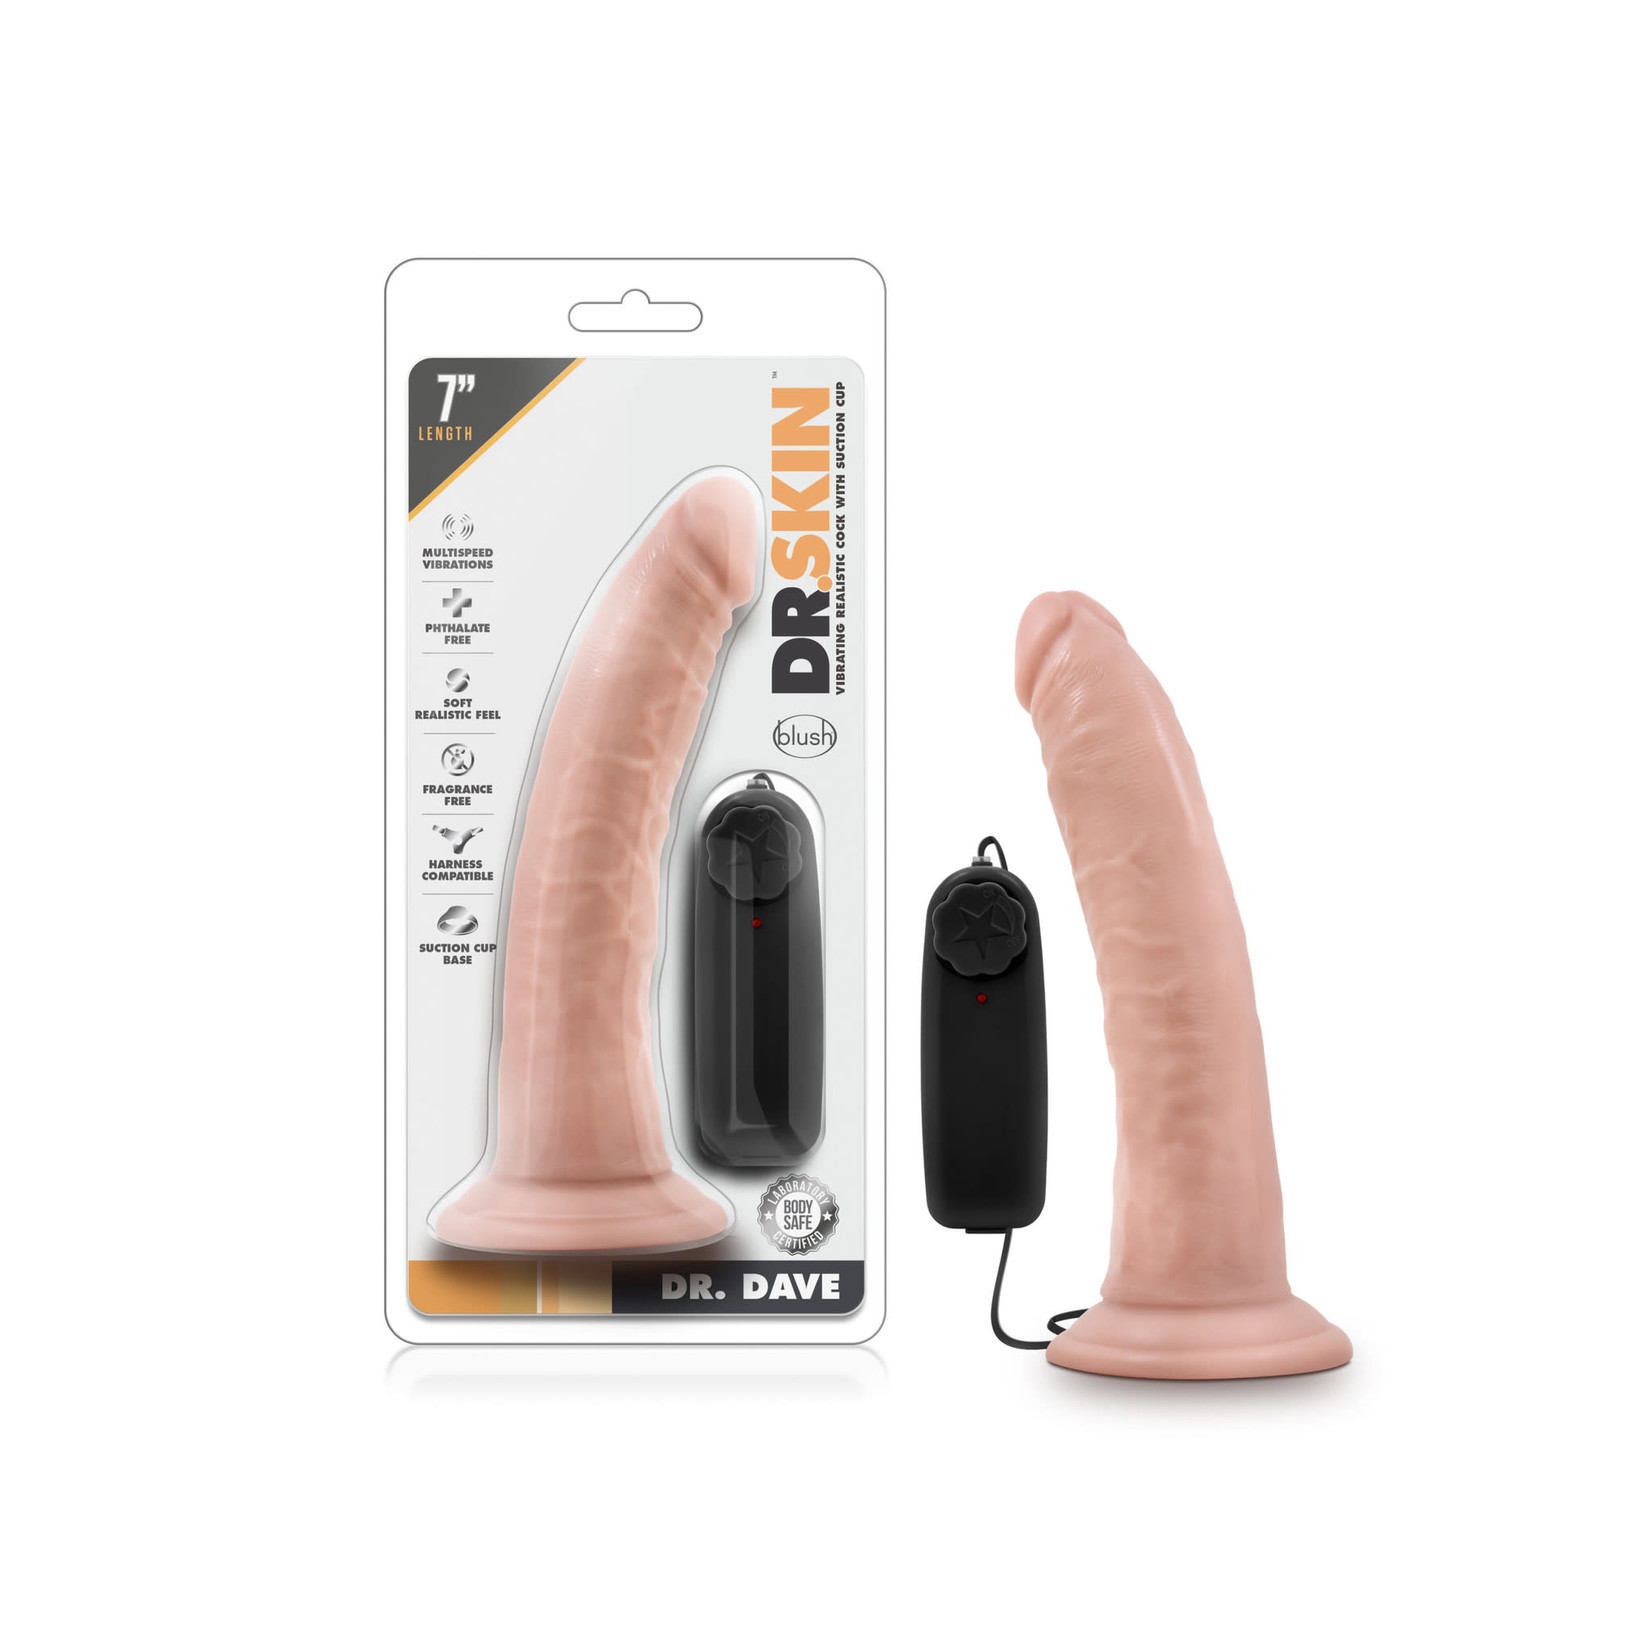 DR. SKIN DR. SKIN - DR. DAVE - 7" VIBRATING COCK WITH SUCTION CUP - VANILLA